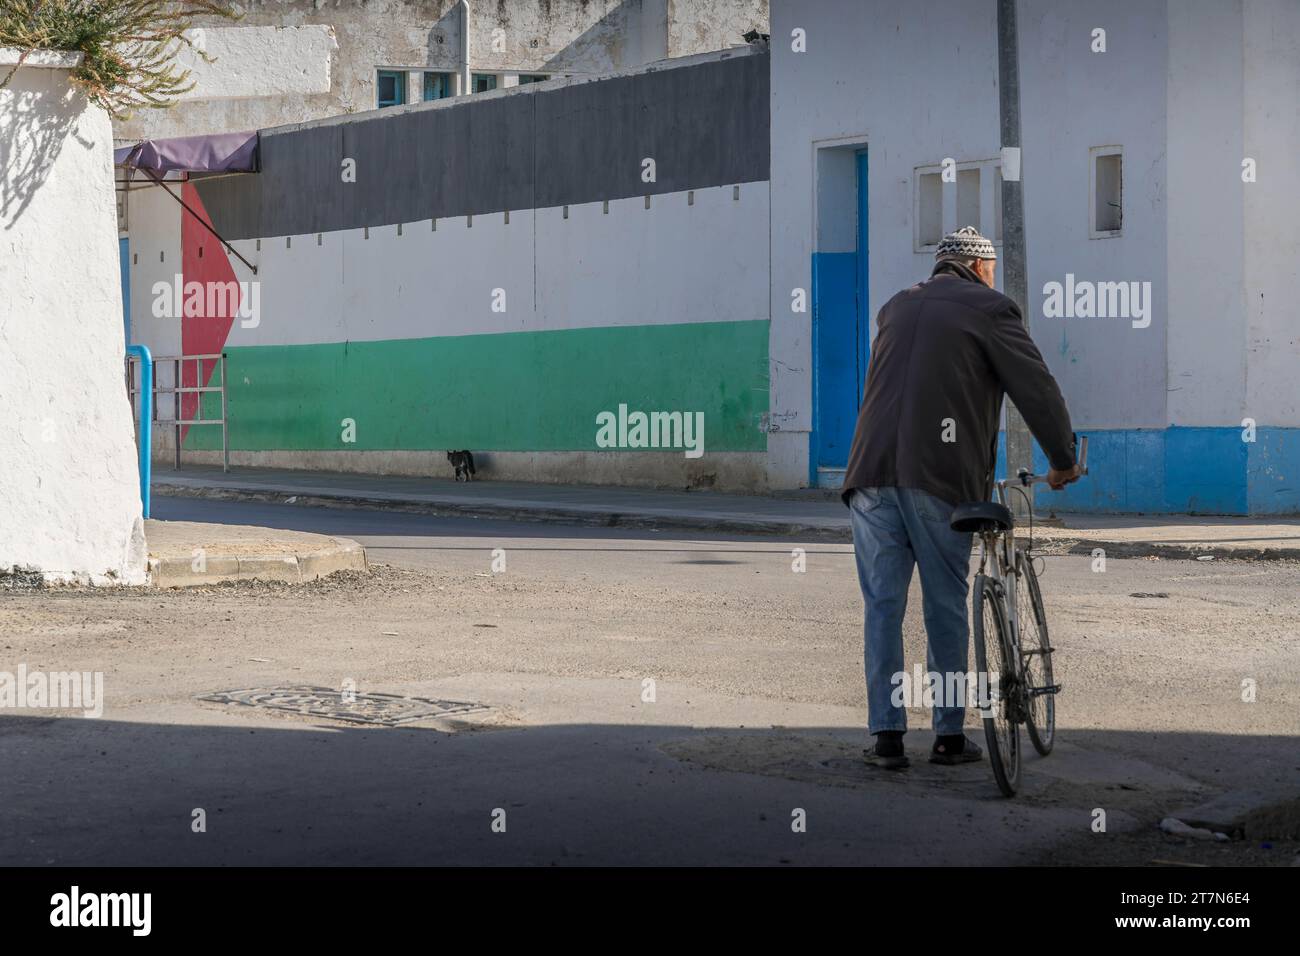 The large Palestinian flag (flag of Palestine) mural on the wall with the old man passing by with the bicycle. Stock Photo